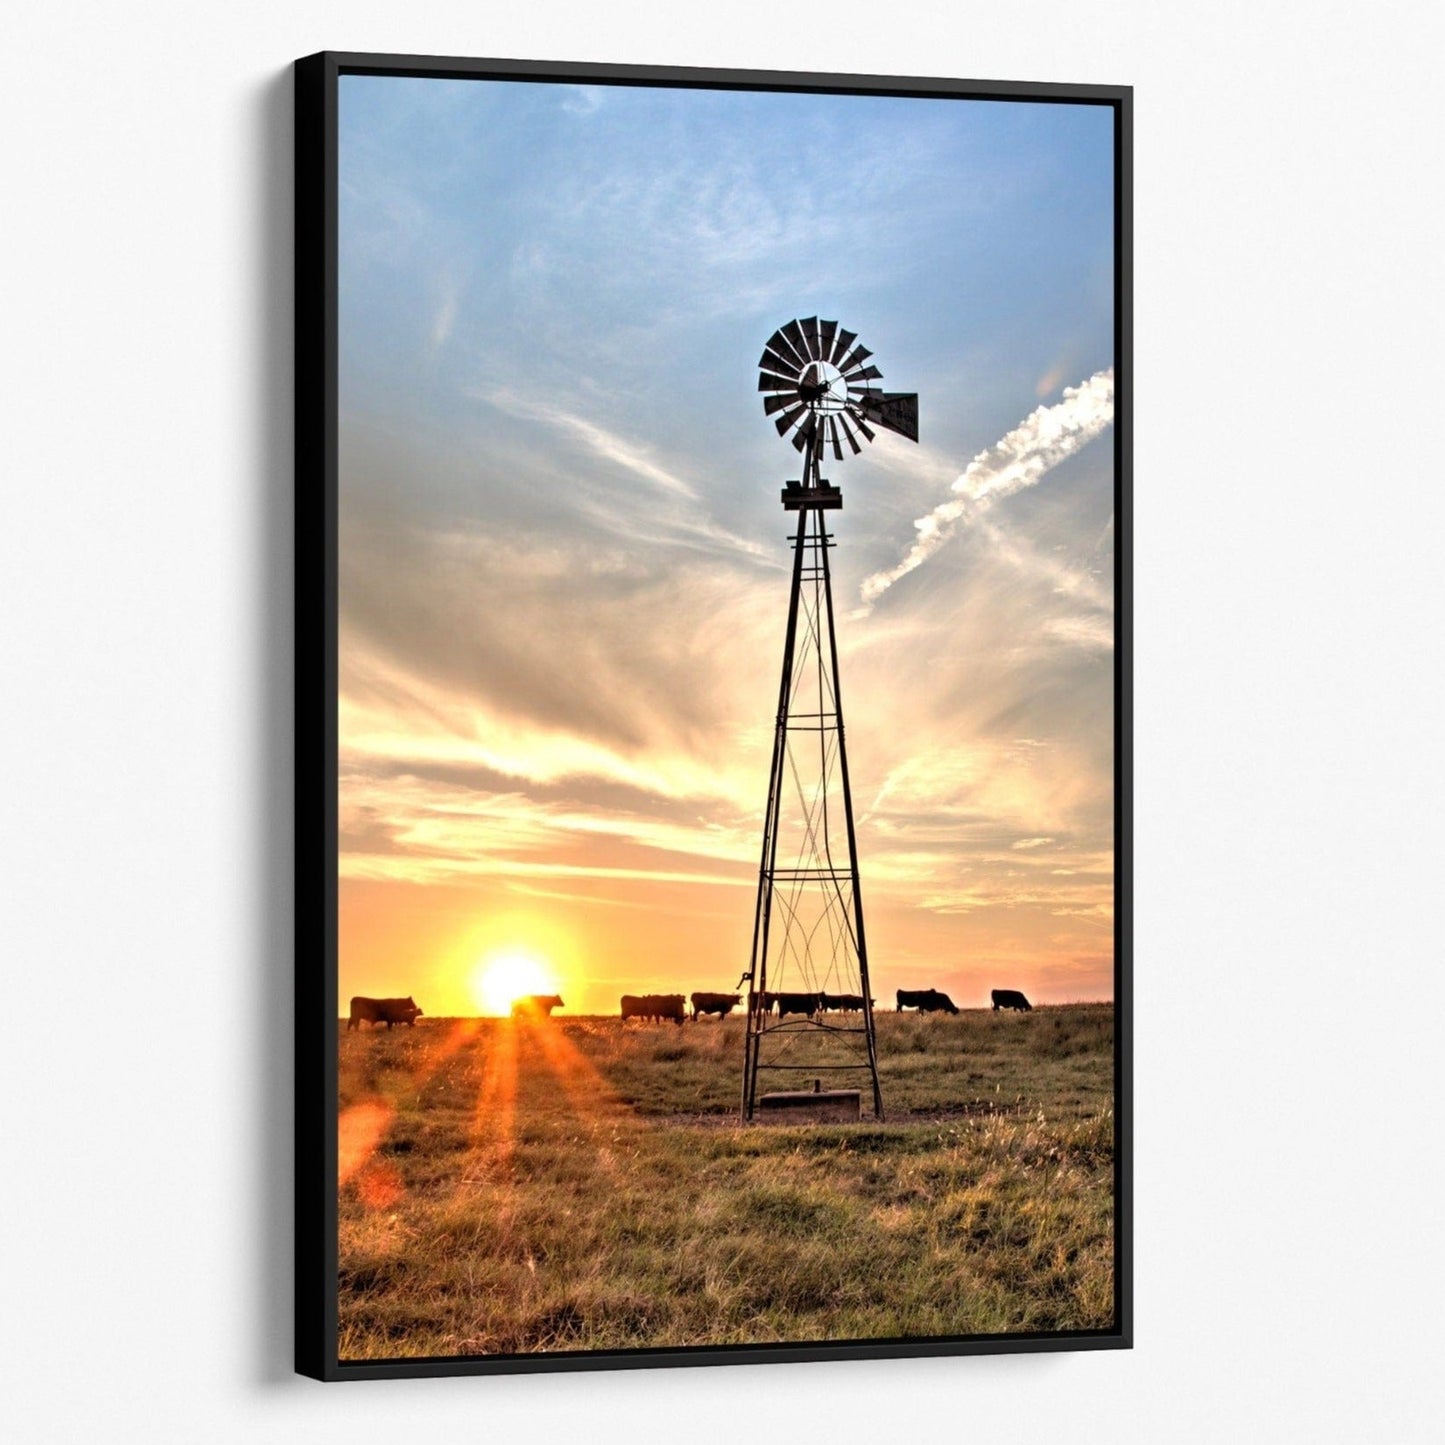 Teri James Photography Wall Art Canvas-Black Frame / 12 x 18 Inches Rustic Windmill and Black Angus Cattle at Sunset